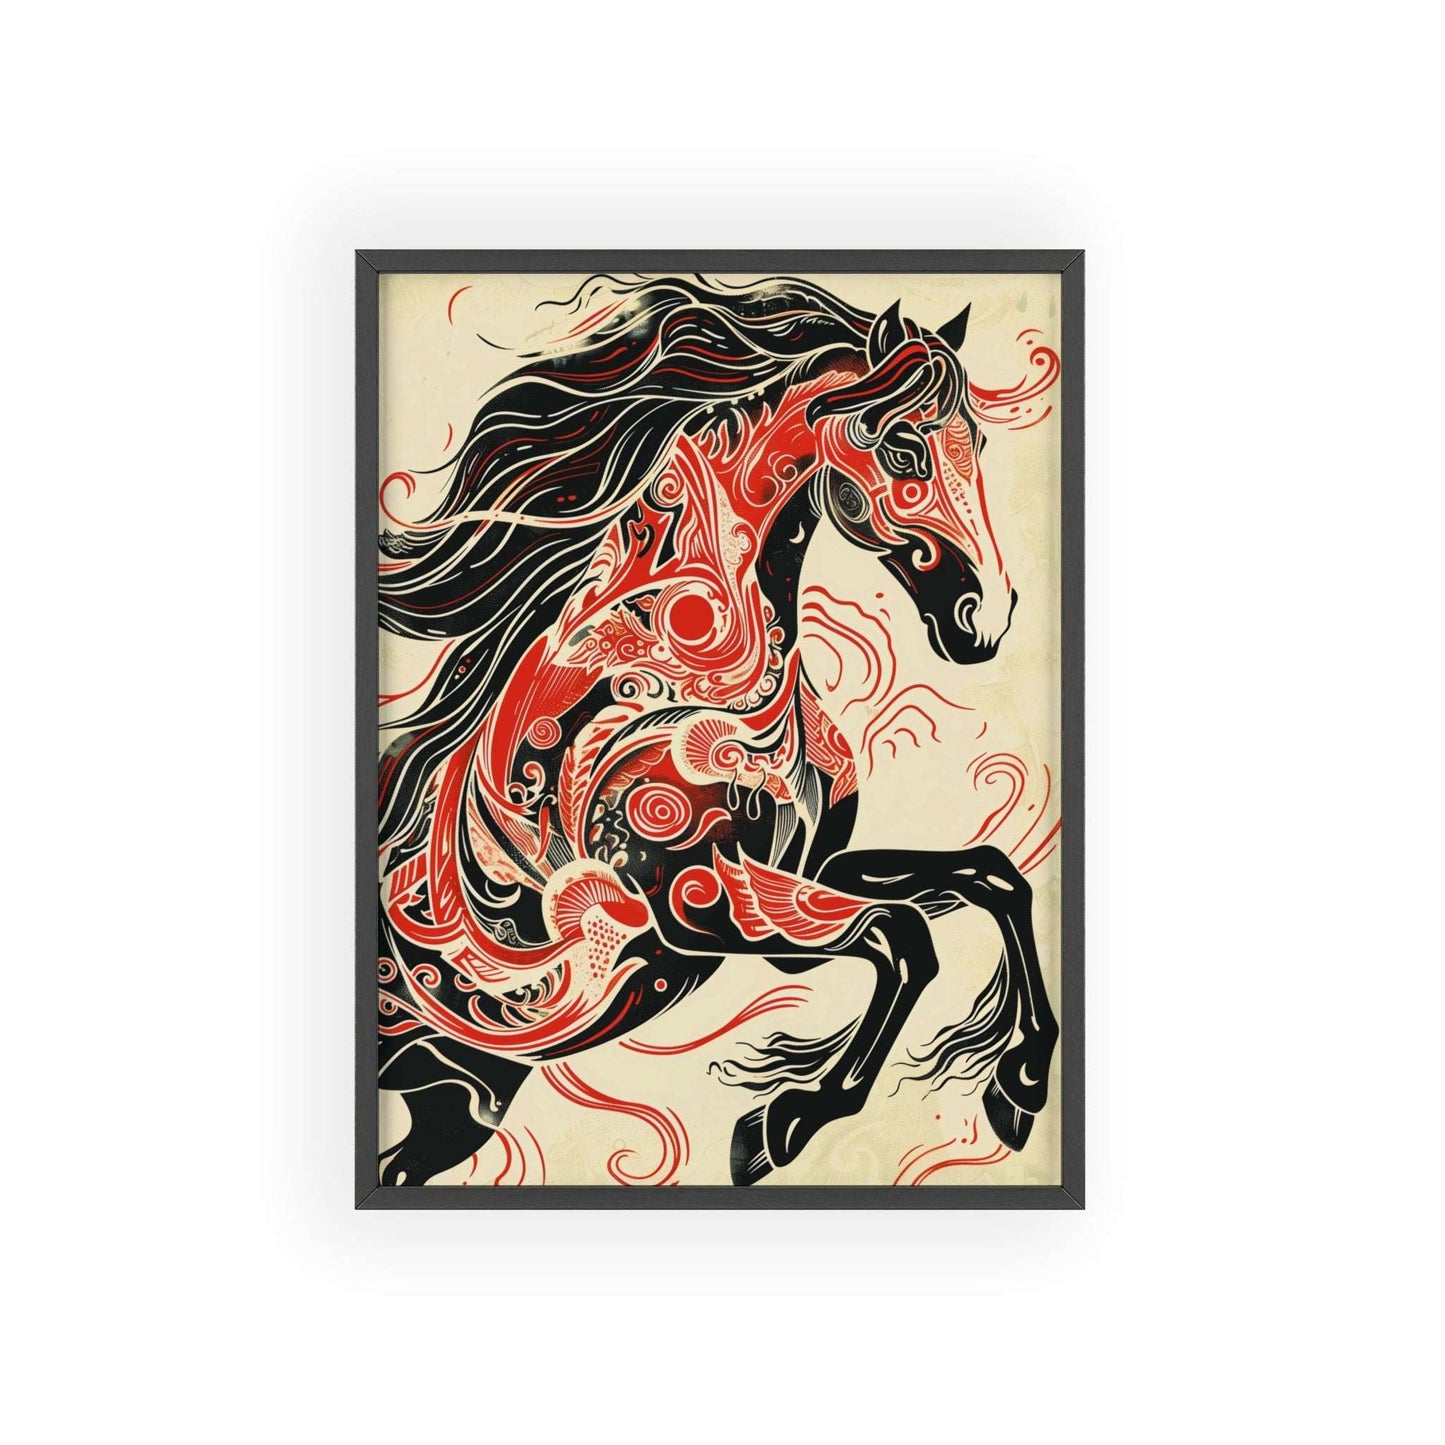 wild horse poster, animal art, bold design, black and red, wildlife decor, intricate patterns, majestic horse, nature illustration, wall art, dynamic artwork